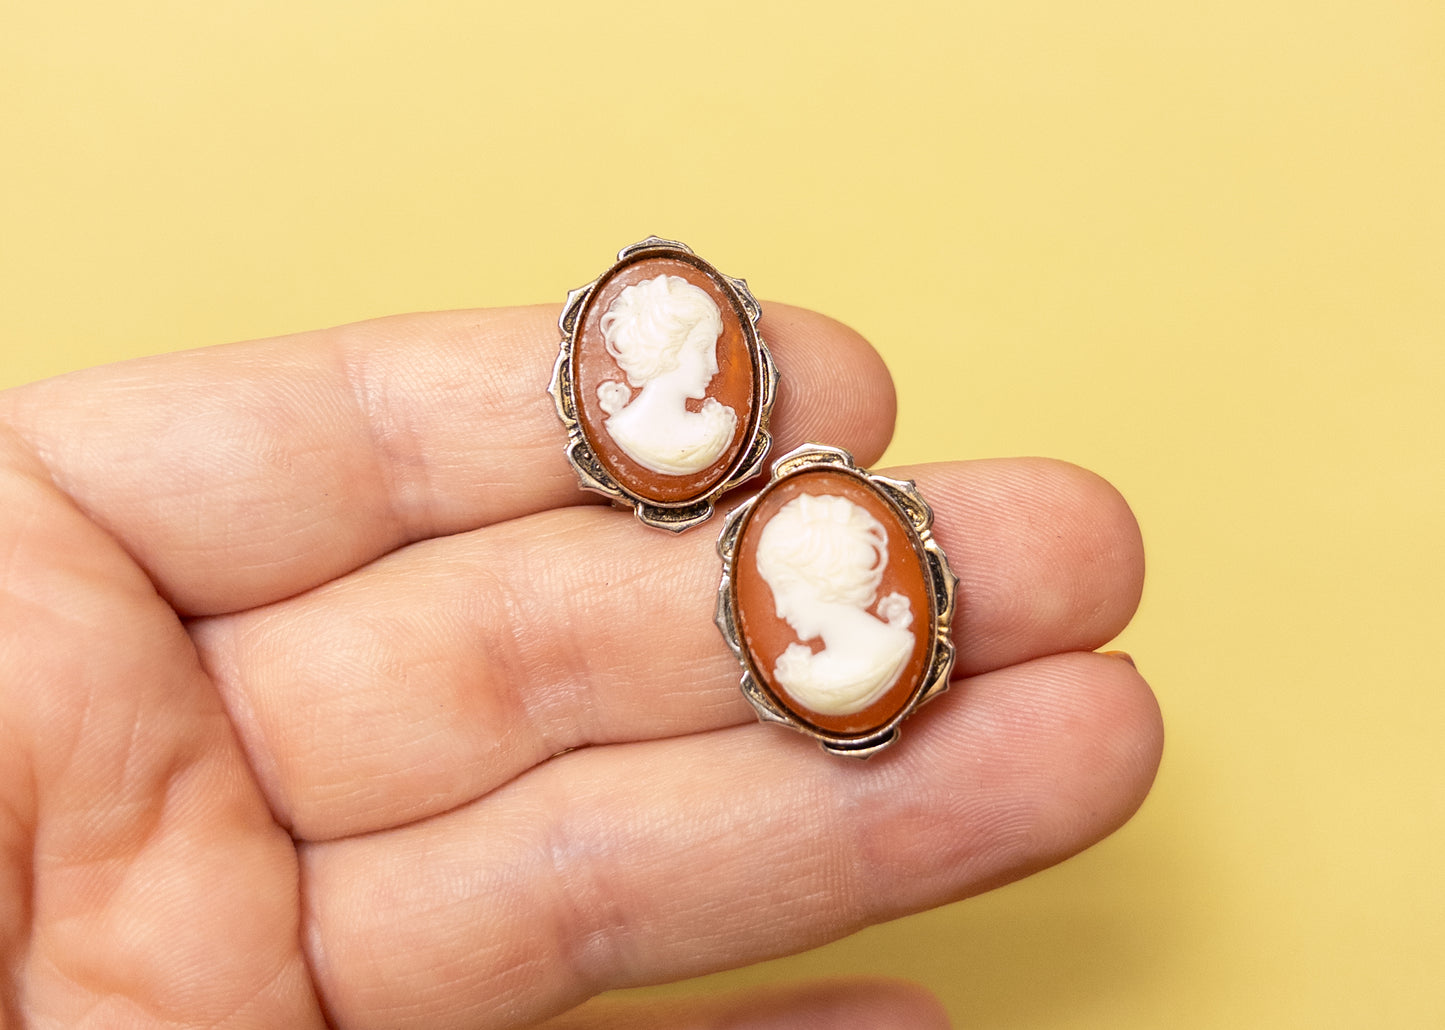 Vintage Dusty Coral Cameo Clip On Earrings